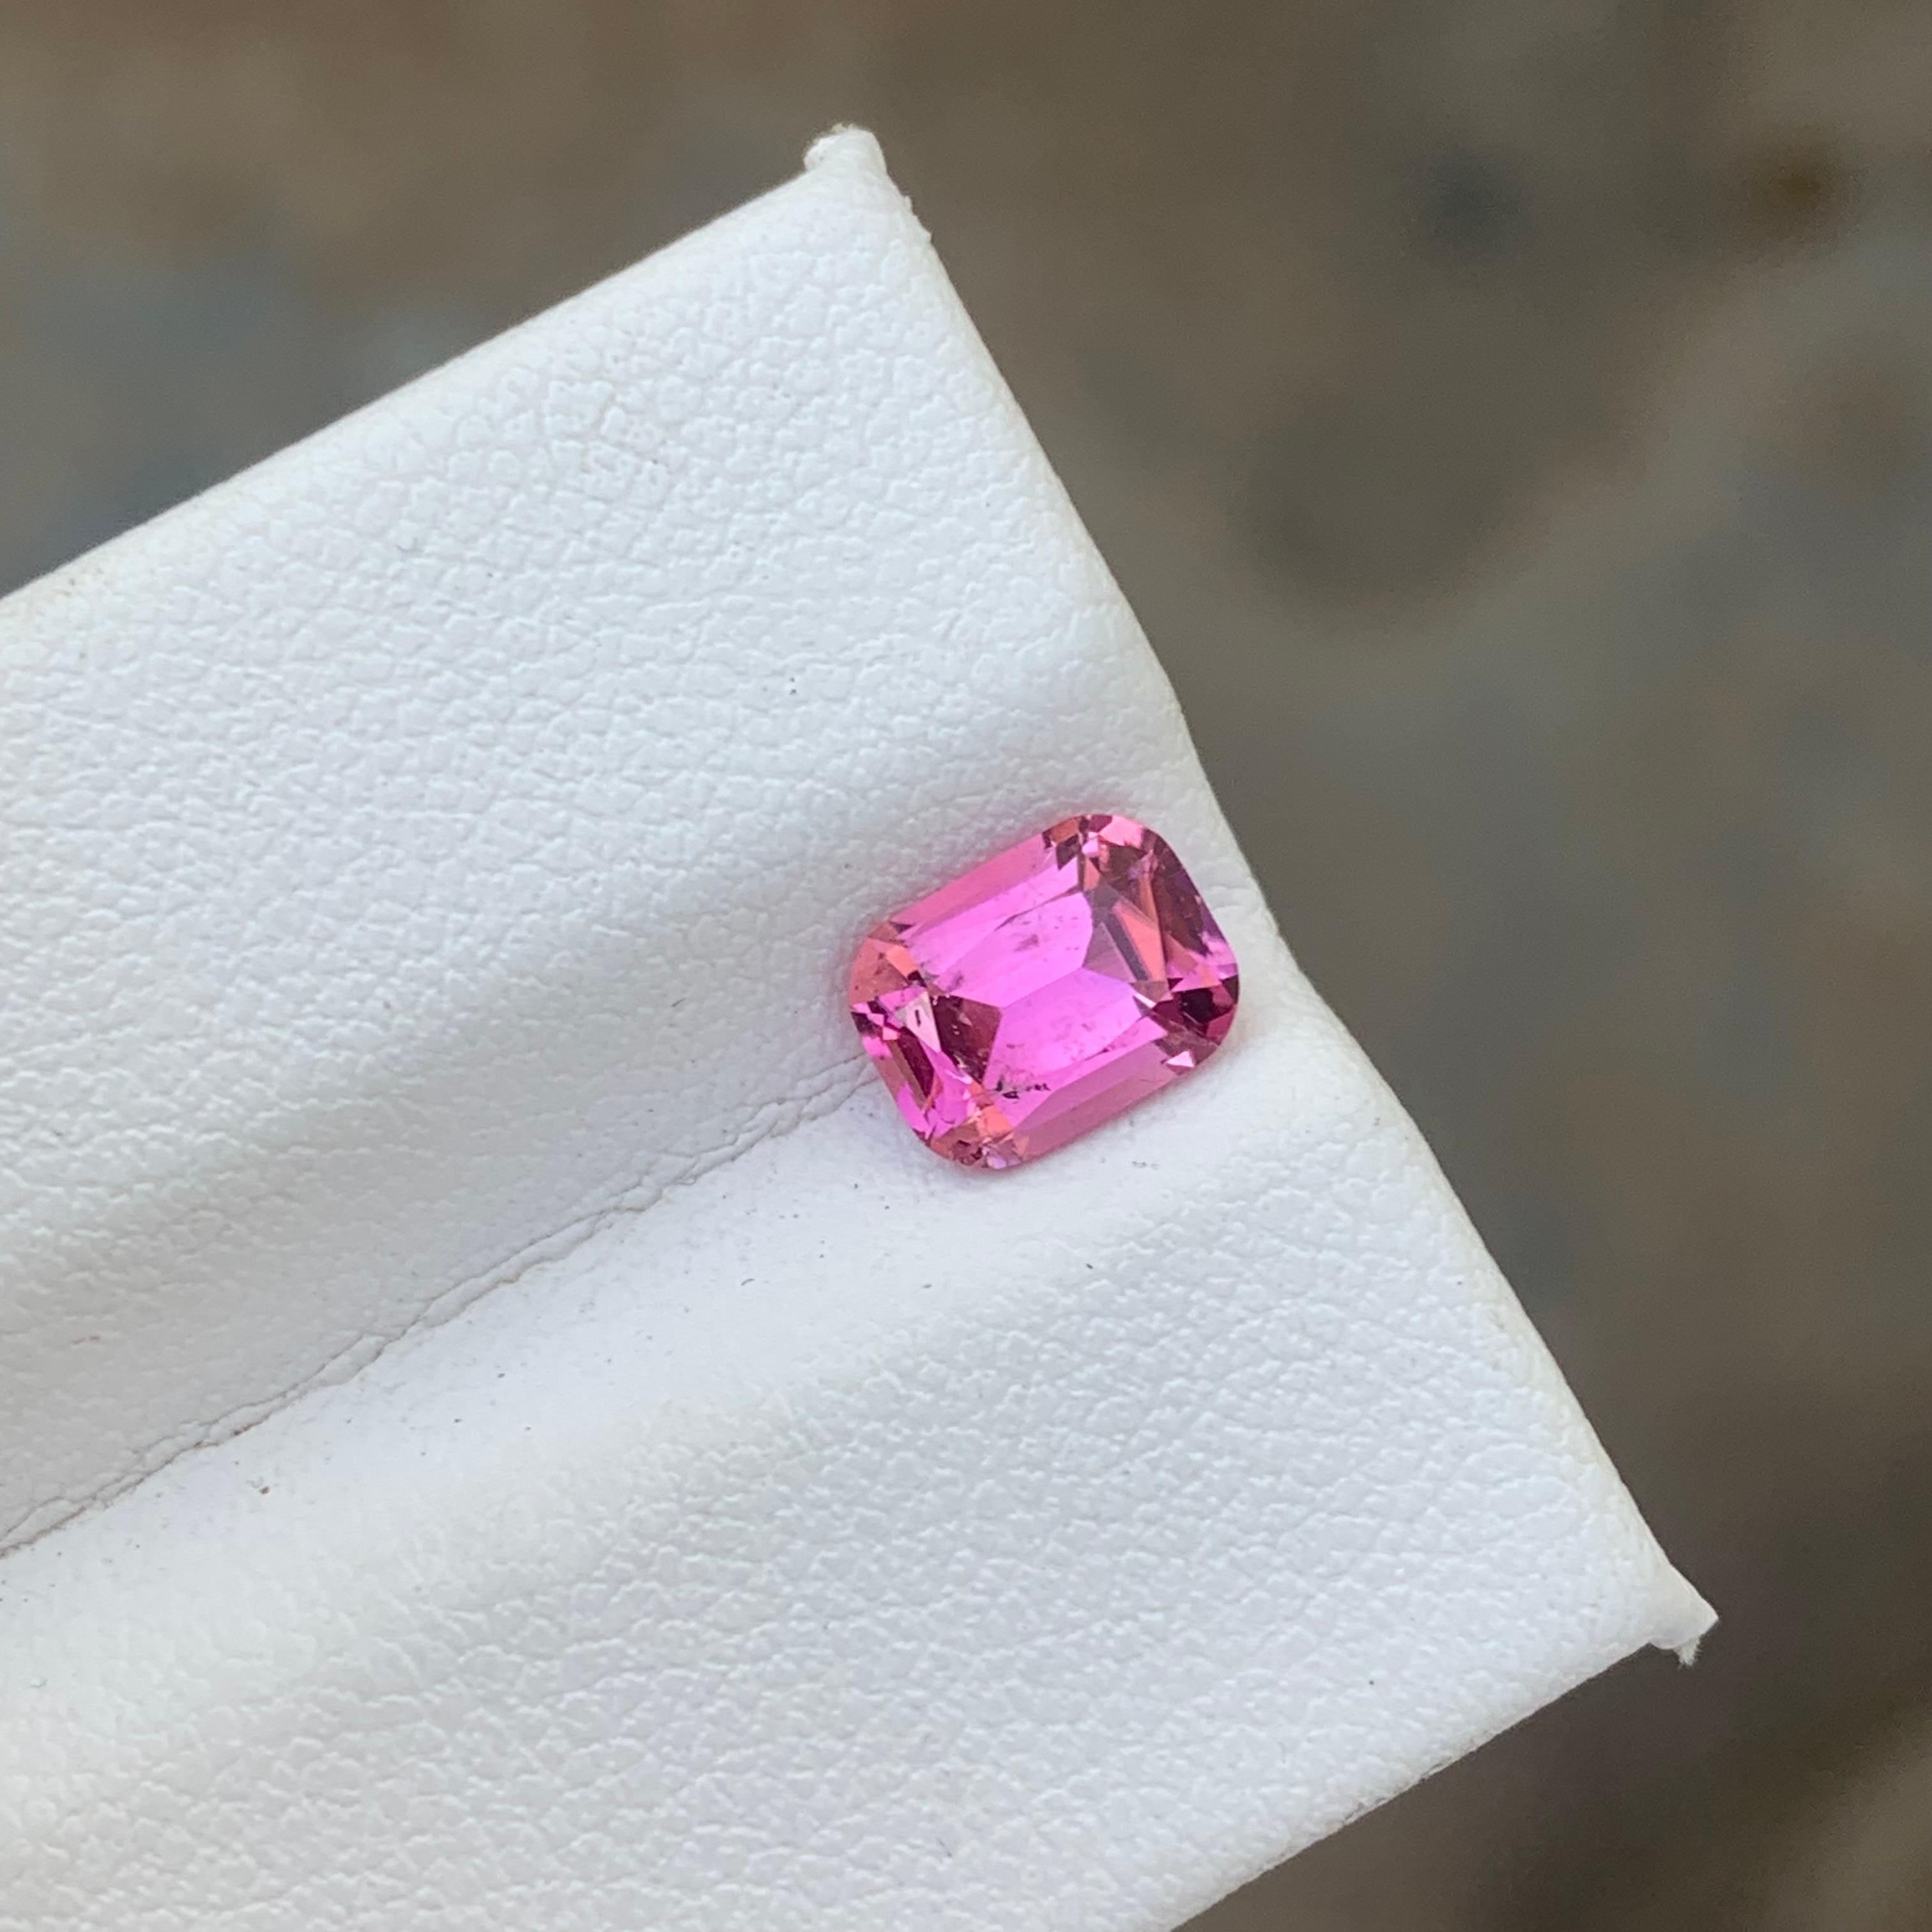 Faceted Tourmaline 
Weight: 1.10 Carats 
Dimension: 7.3x5.6x3.8 Mm
Origin: Afghanistan 
Color:  Pink
Shape: Cushion
Clarity: Eye Clean
Certificate: On Demand 
With a rating between 7 and 7.5 on the Mohs scale of mineral hardness, tourmaline jewelry